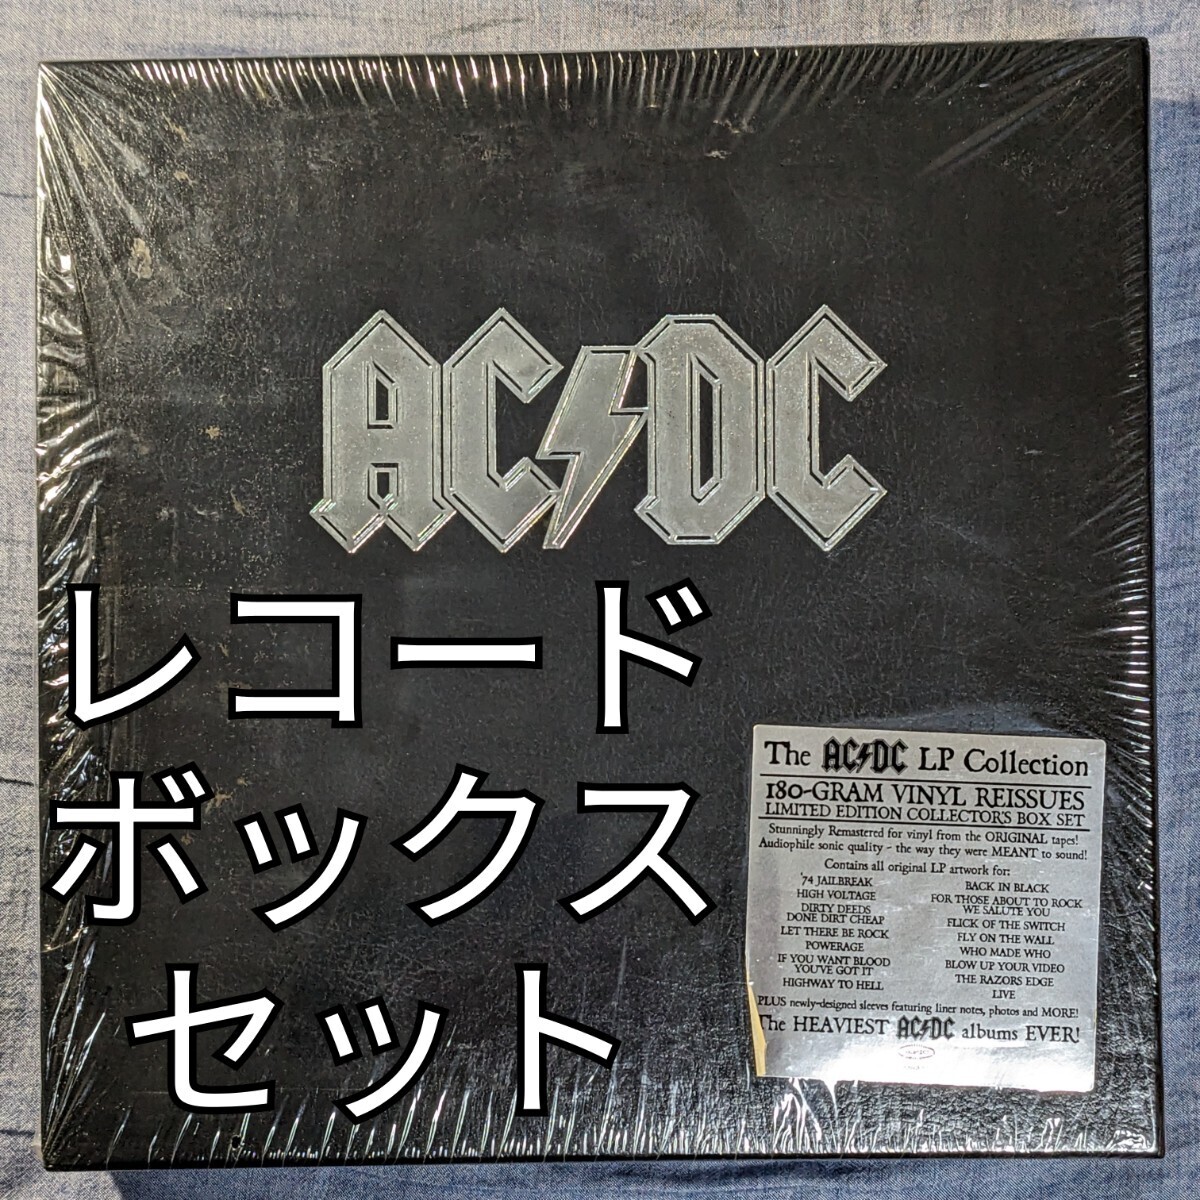 AC/DC レコードボックスセット / LP Collection 180g VINYL reissues / limited edition collector's box set / 輸入盤 / アナログ盤 16LPの画像1